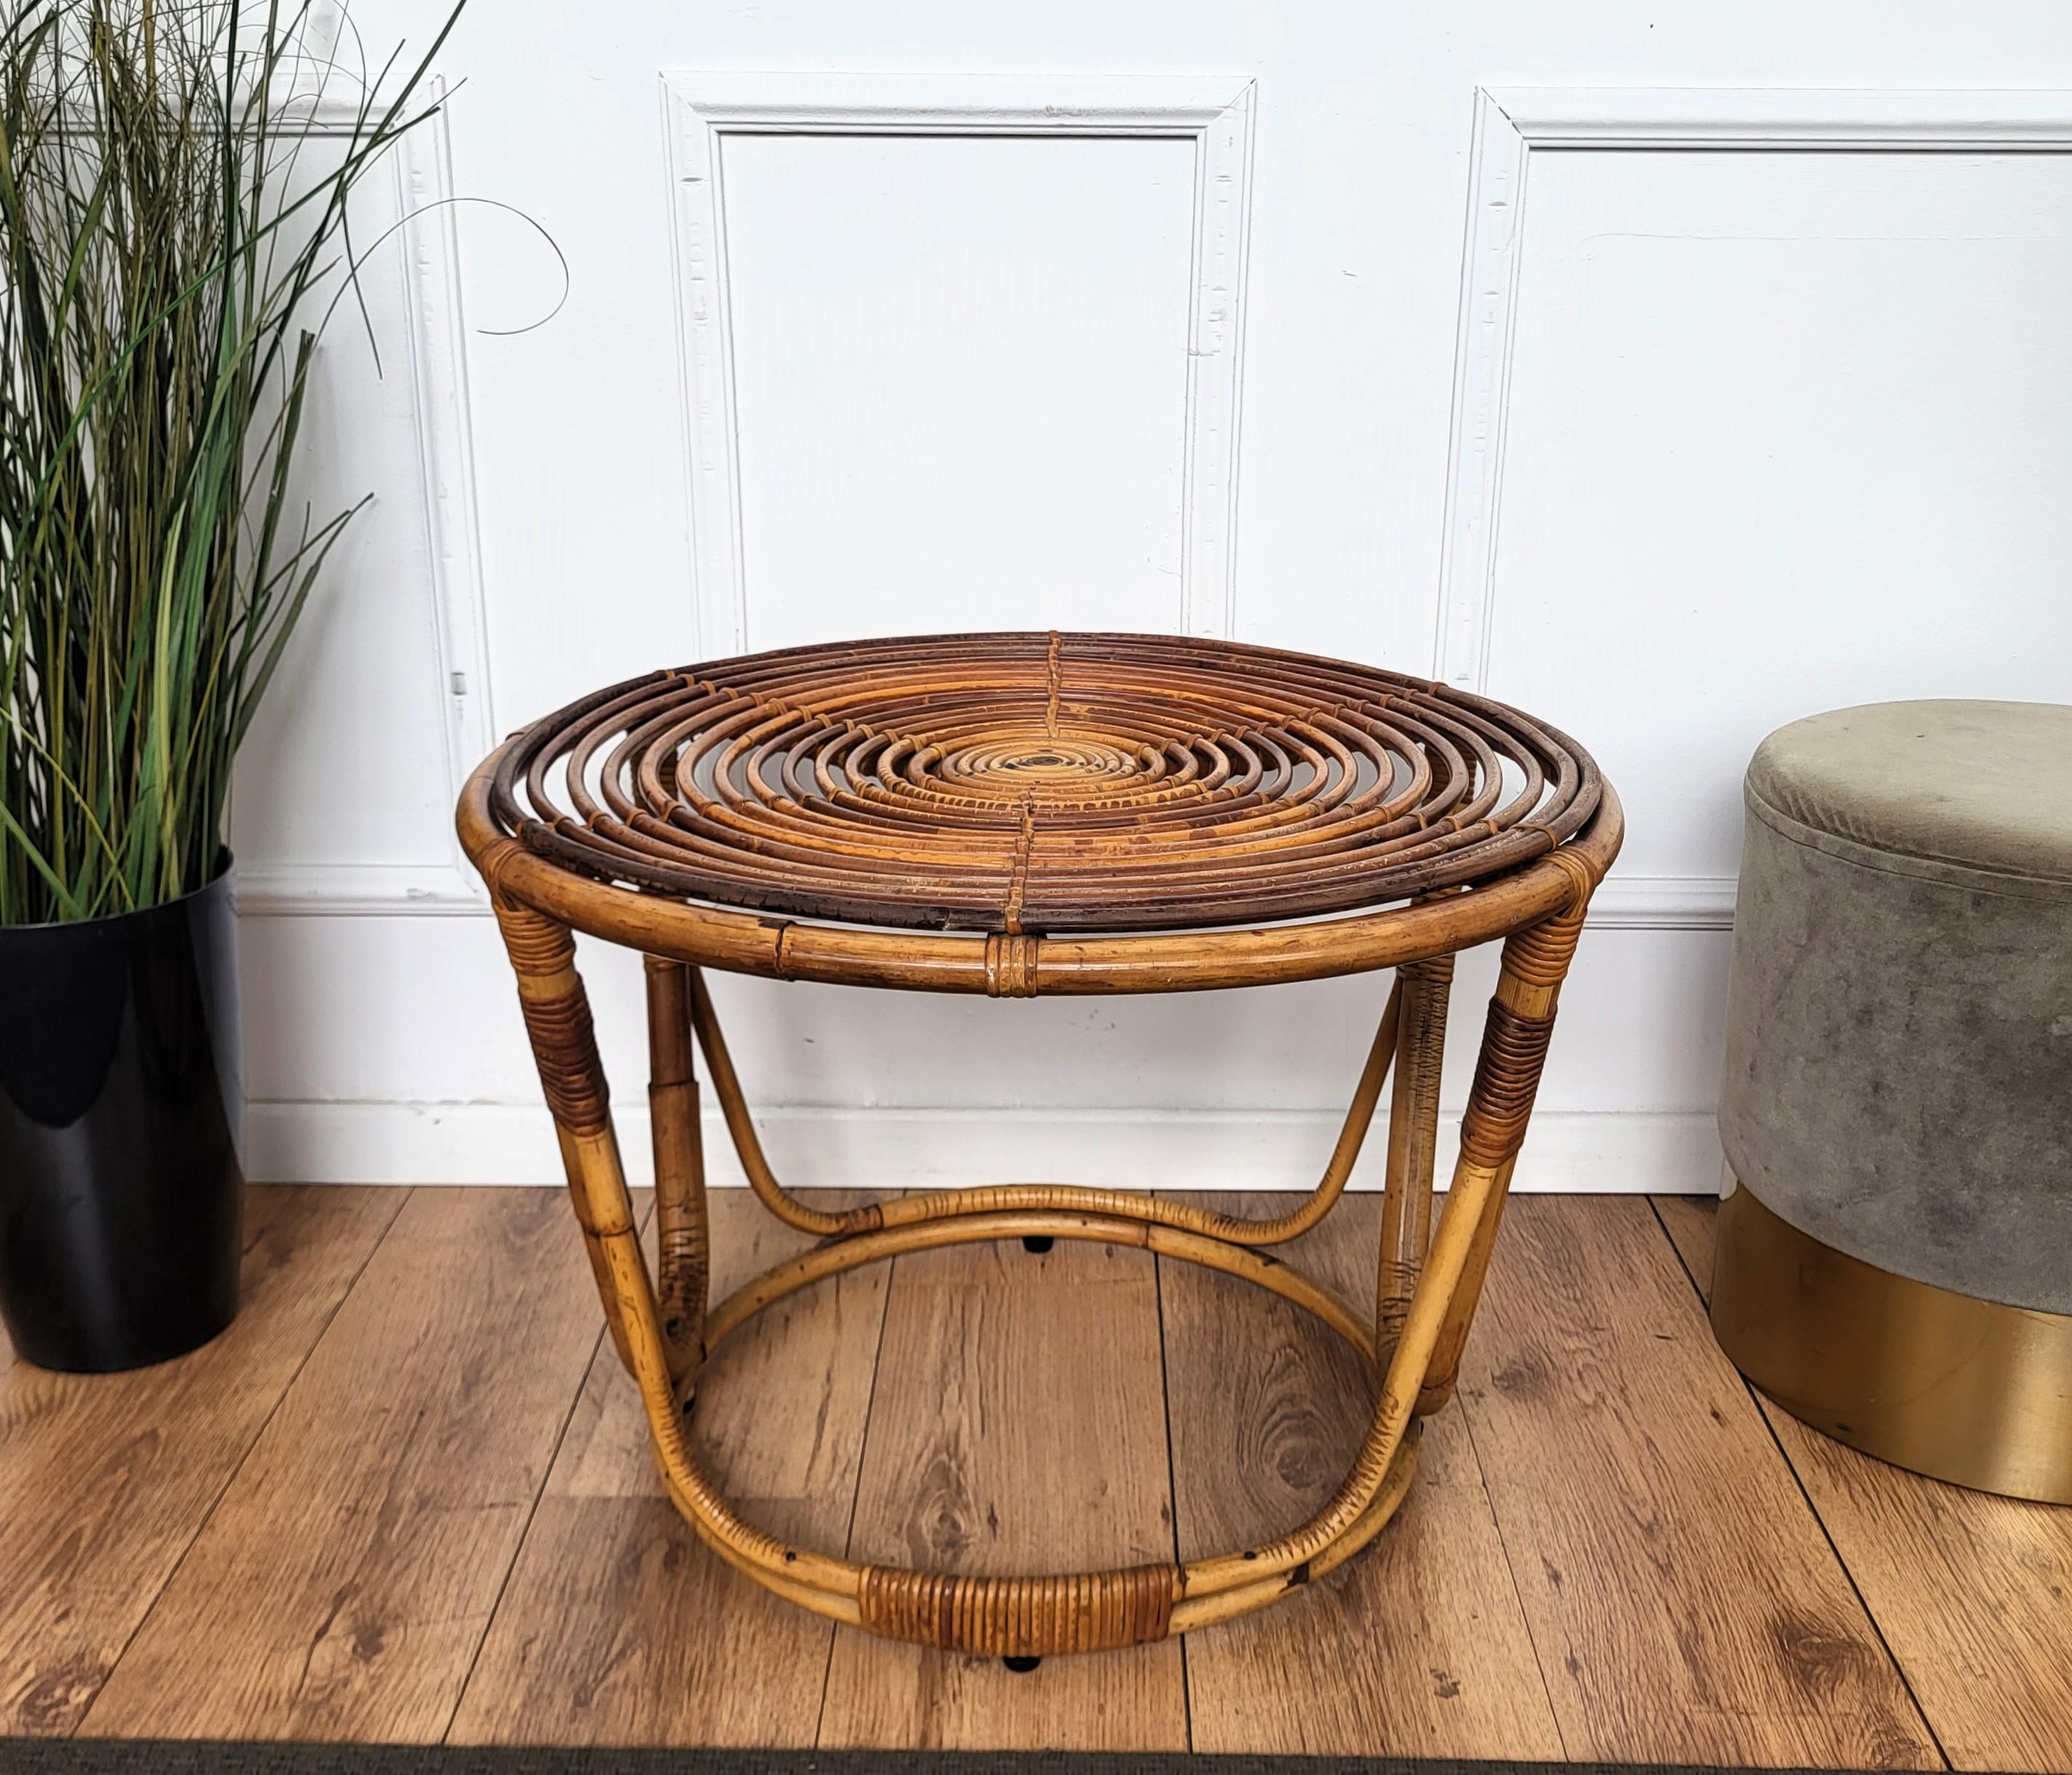 20th Century 1960s Italian Bamboo Rattan Bohemian French Riviera Round Coffee or Accent Table For Sale